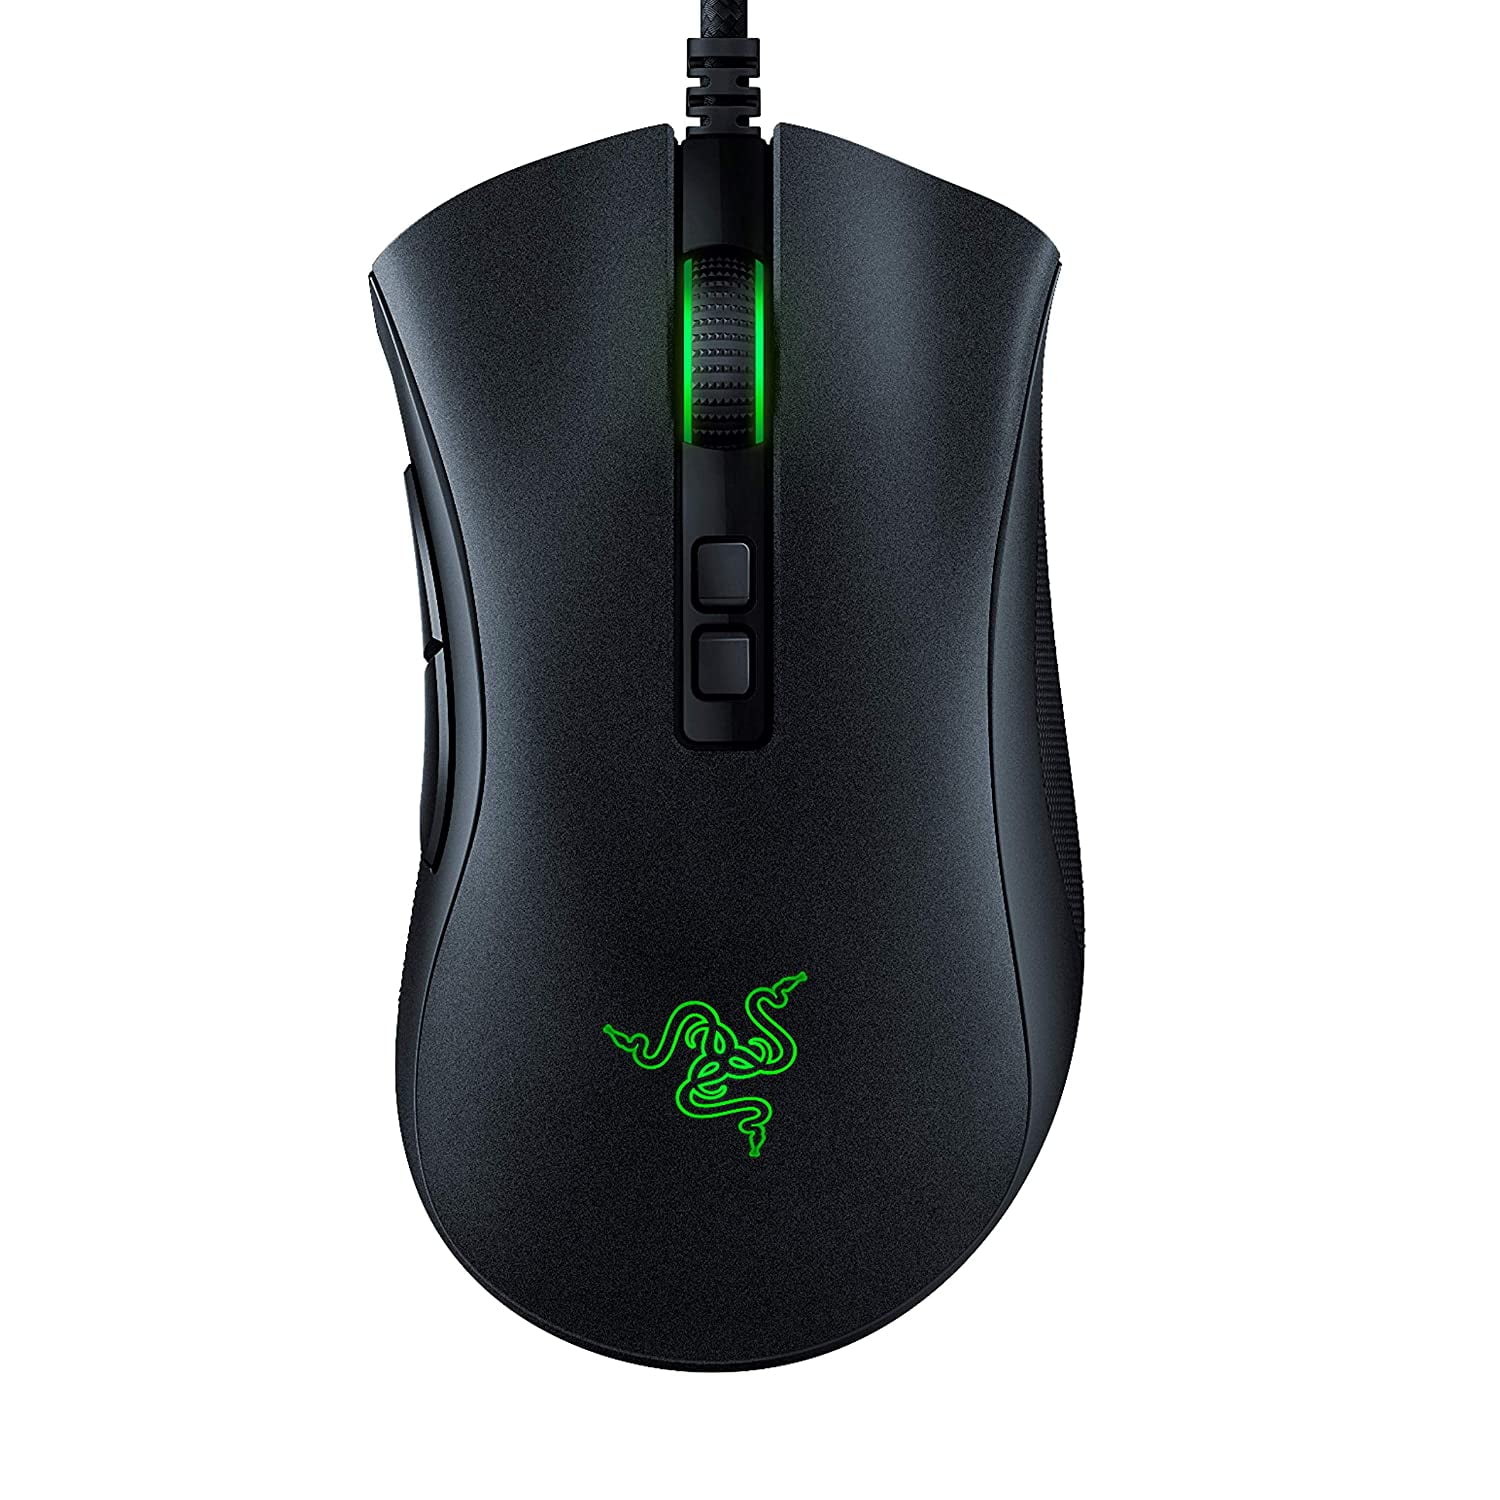 Razer DeathAdder v2 Gaming Mouse: 20K DPI Optical Sensor - Fastest Gaming Mouse Switch - Chroma RGB Lighting - 8 Programmable Buttons - Rubberized Side Grips - Classic Black